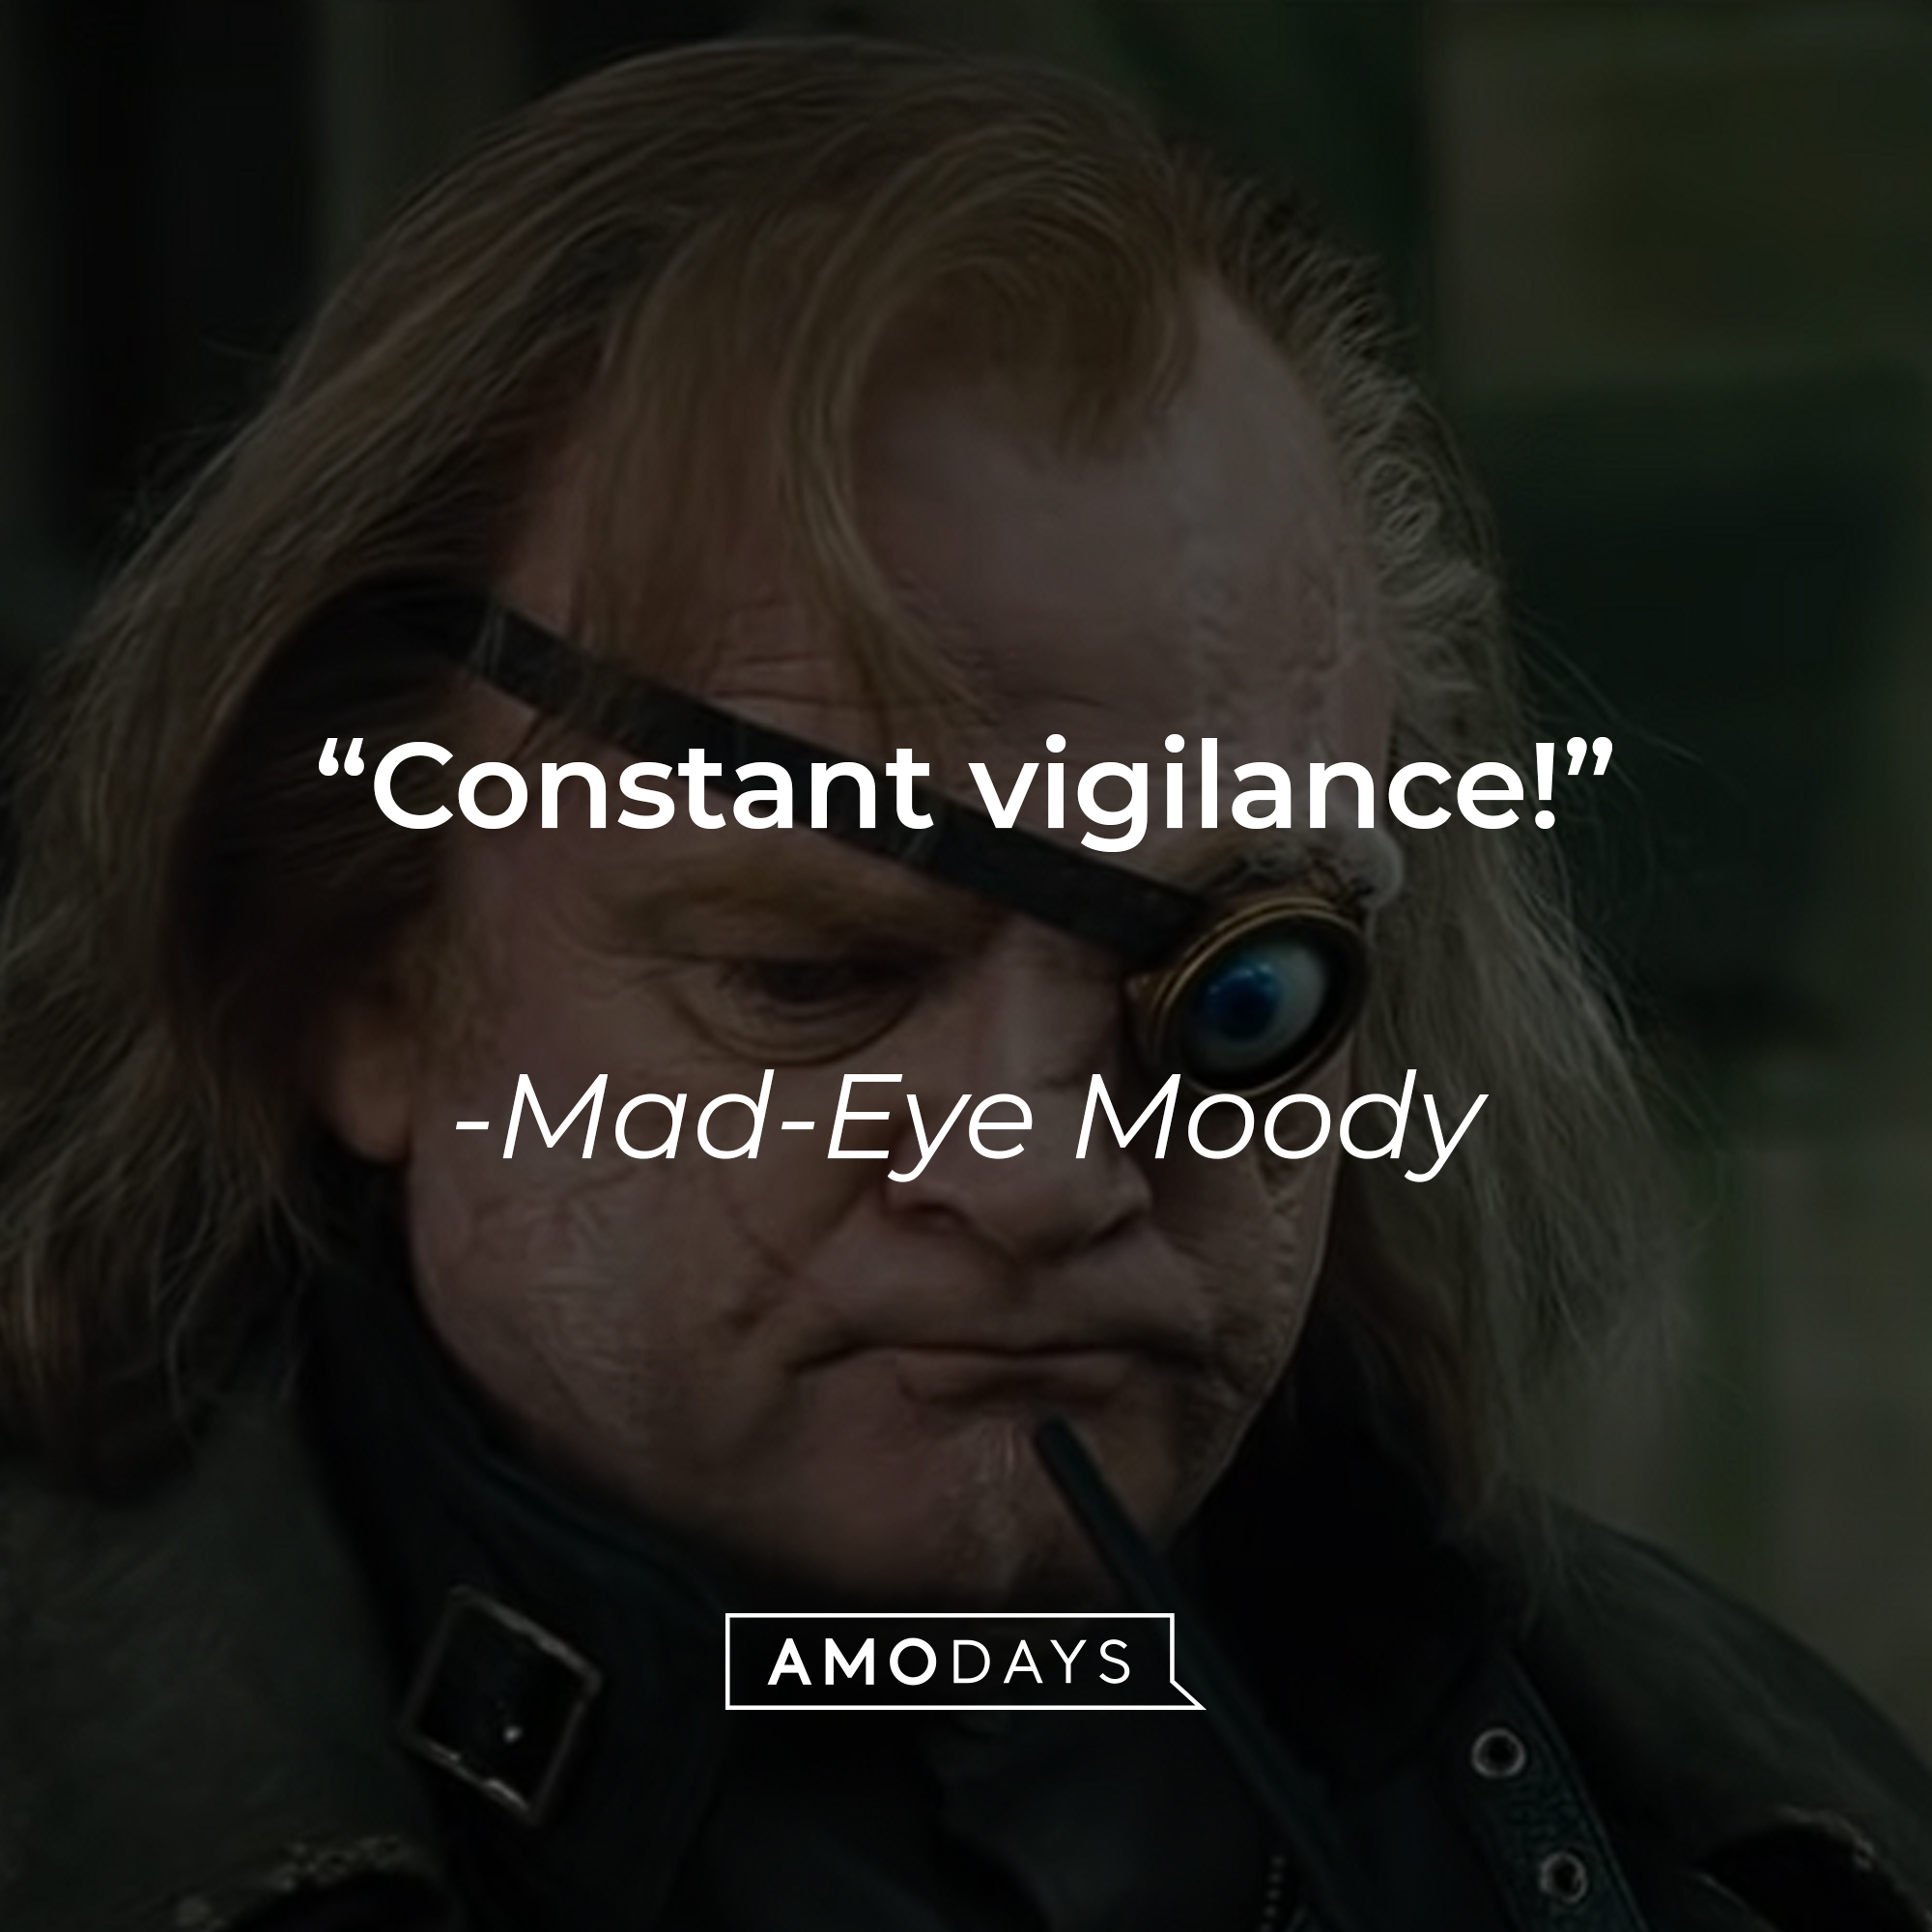 Mad-Eye Moody's quote: "Constant vigilance!" | Source: youtube.com/harrypotter